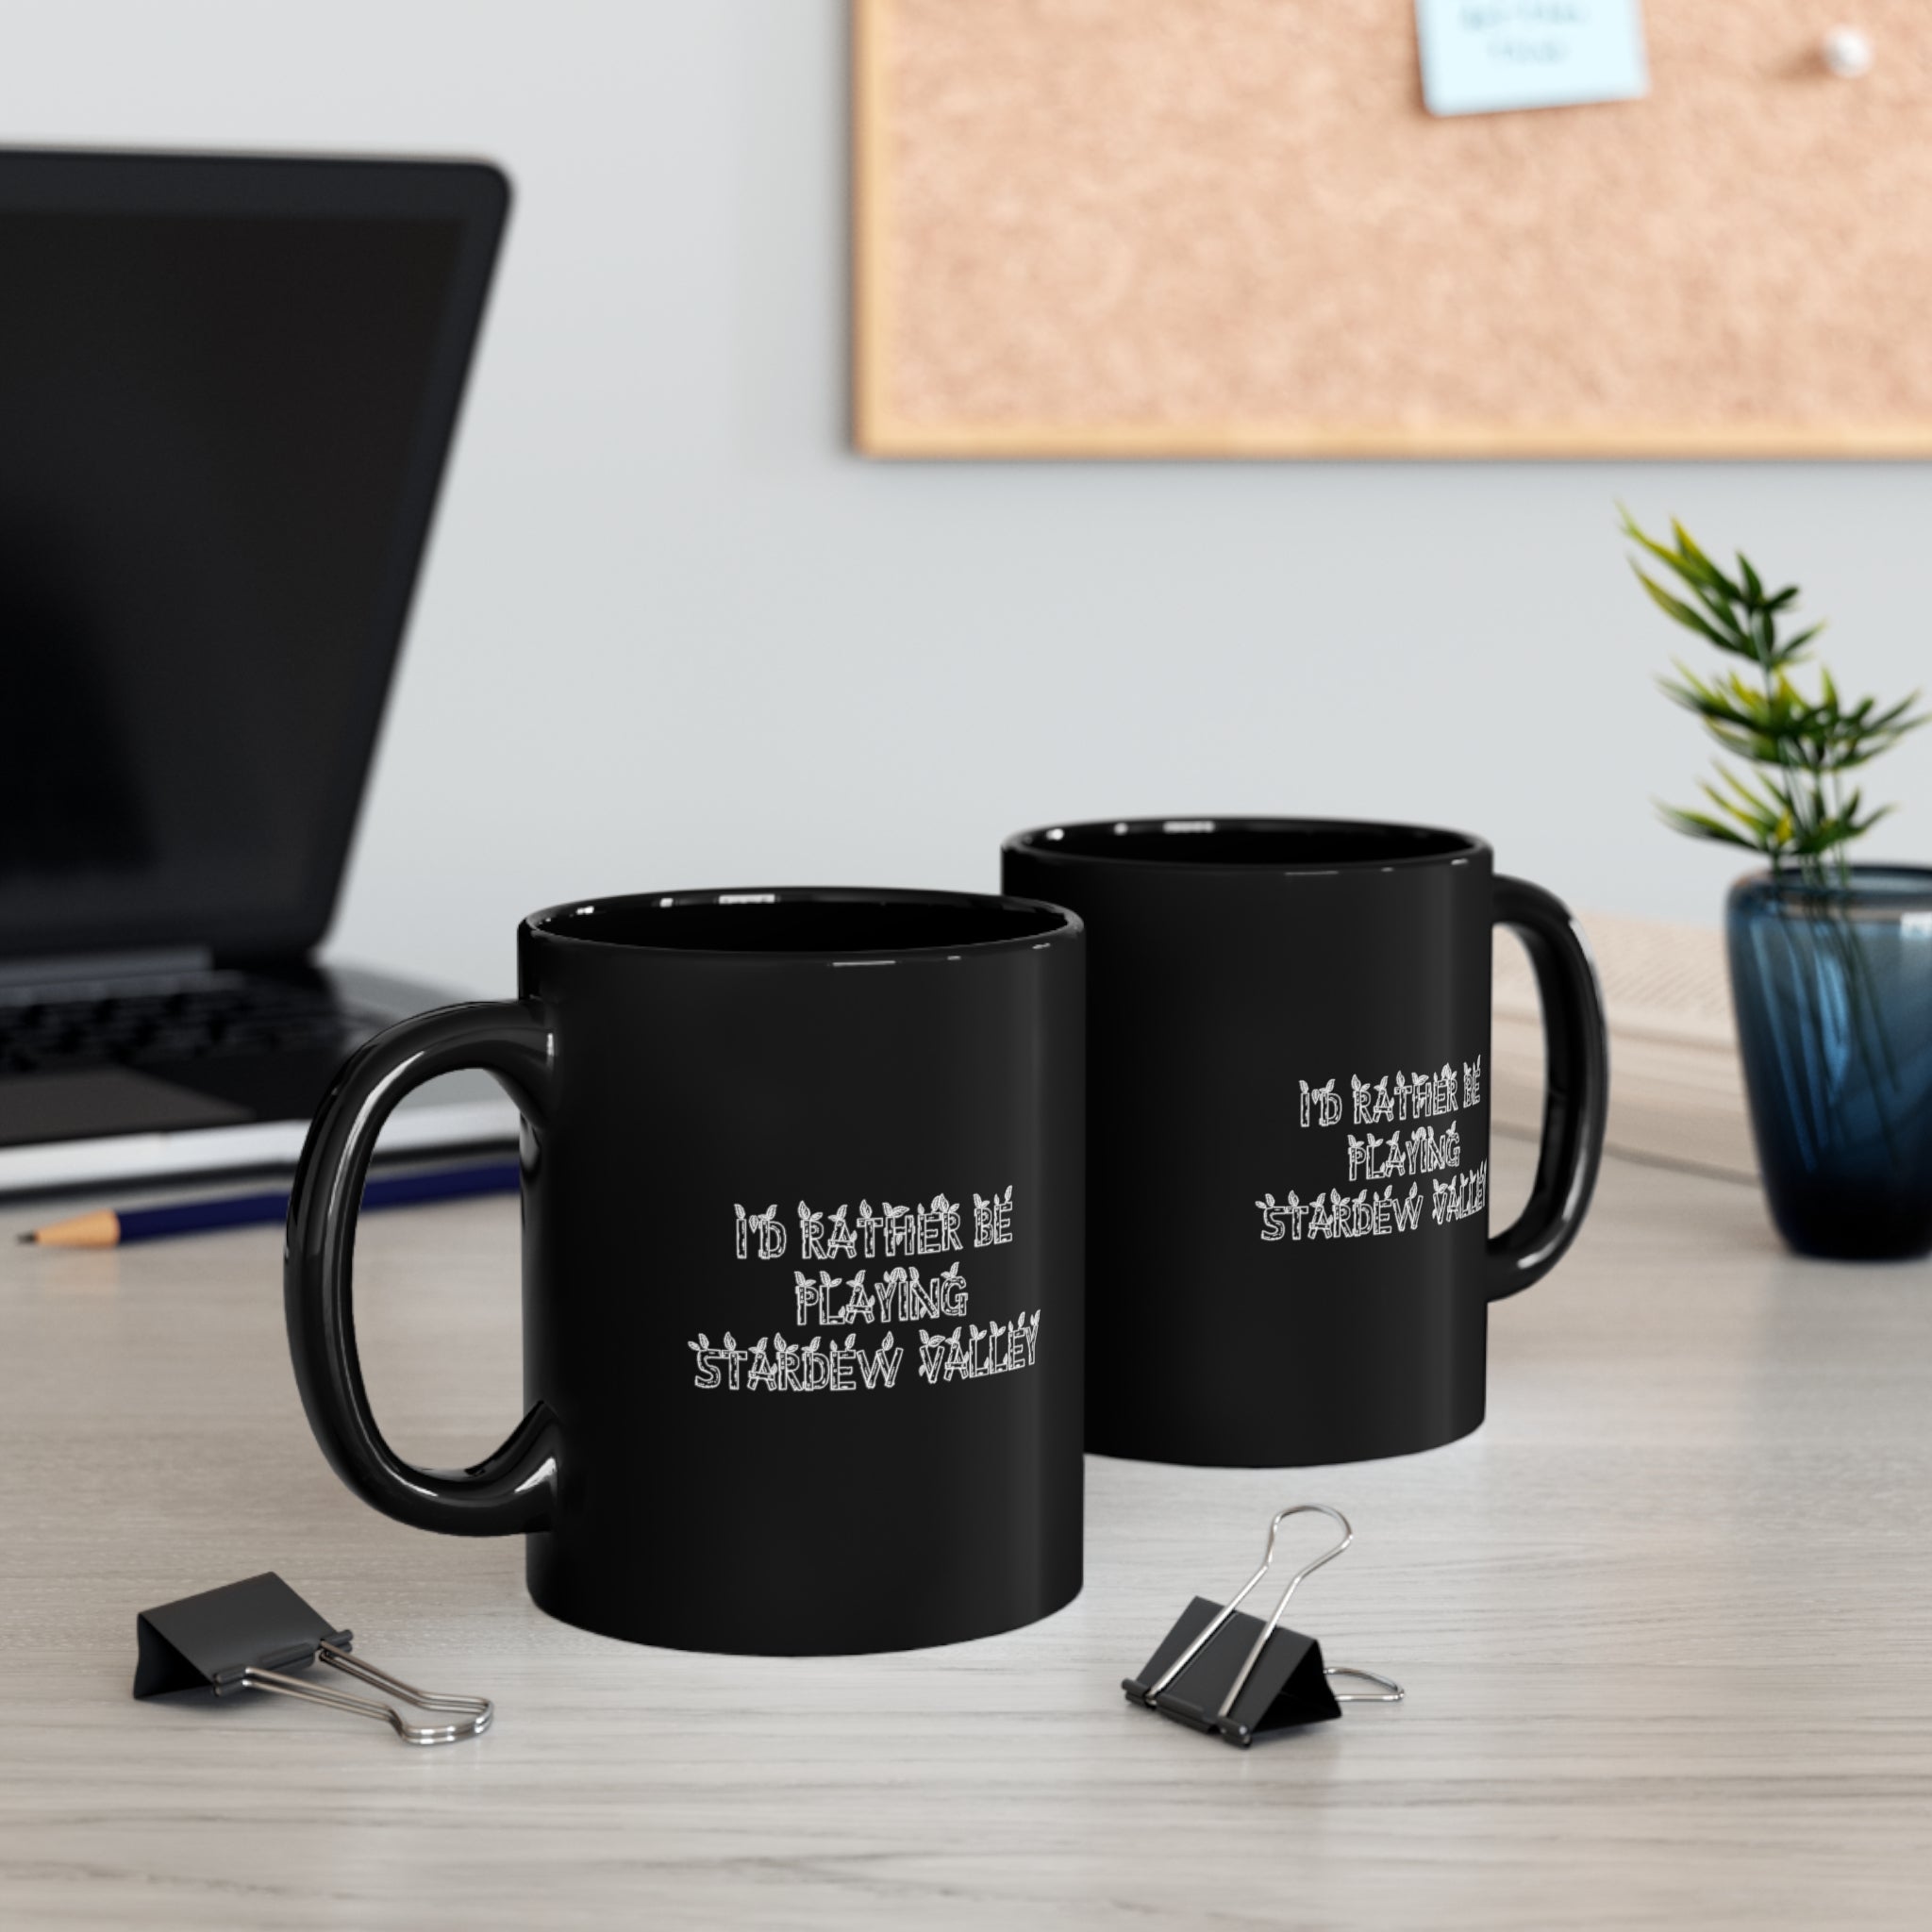 Stardew Valley I'd Rather Be Playing Black Mug (11oz, 15oz) Cups Mugs Cup Gamer Gift For Him Her Game Cup Cups Mugs Birthday Christmas Valentine's Anniversary Gifts